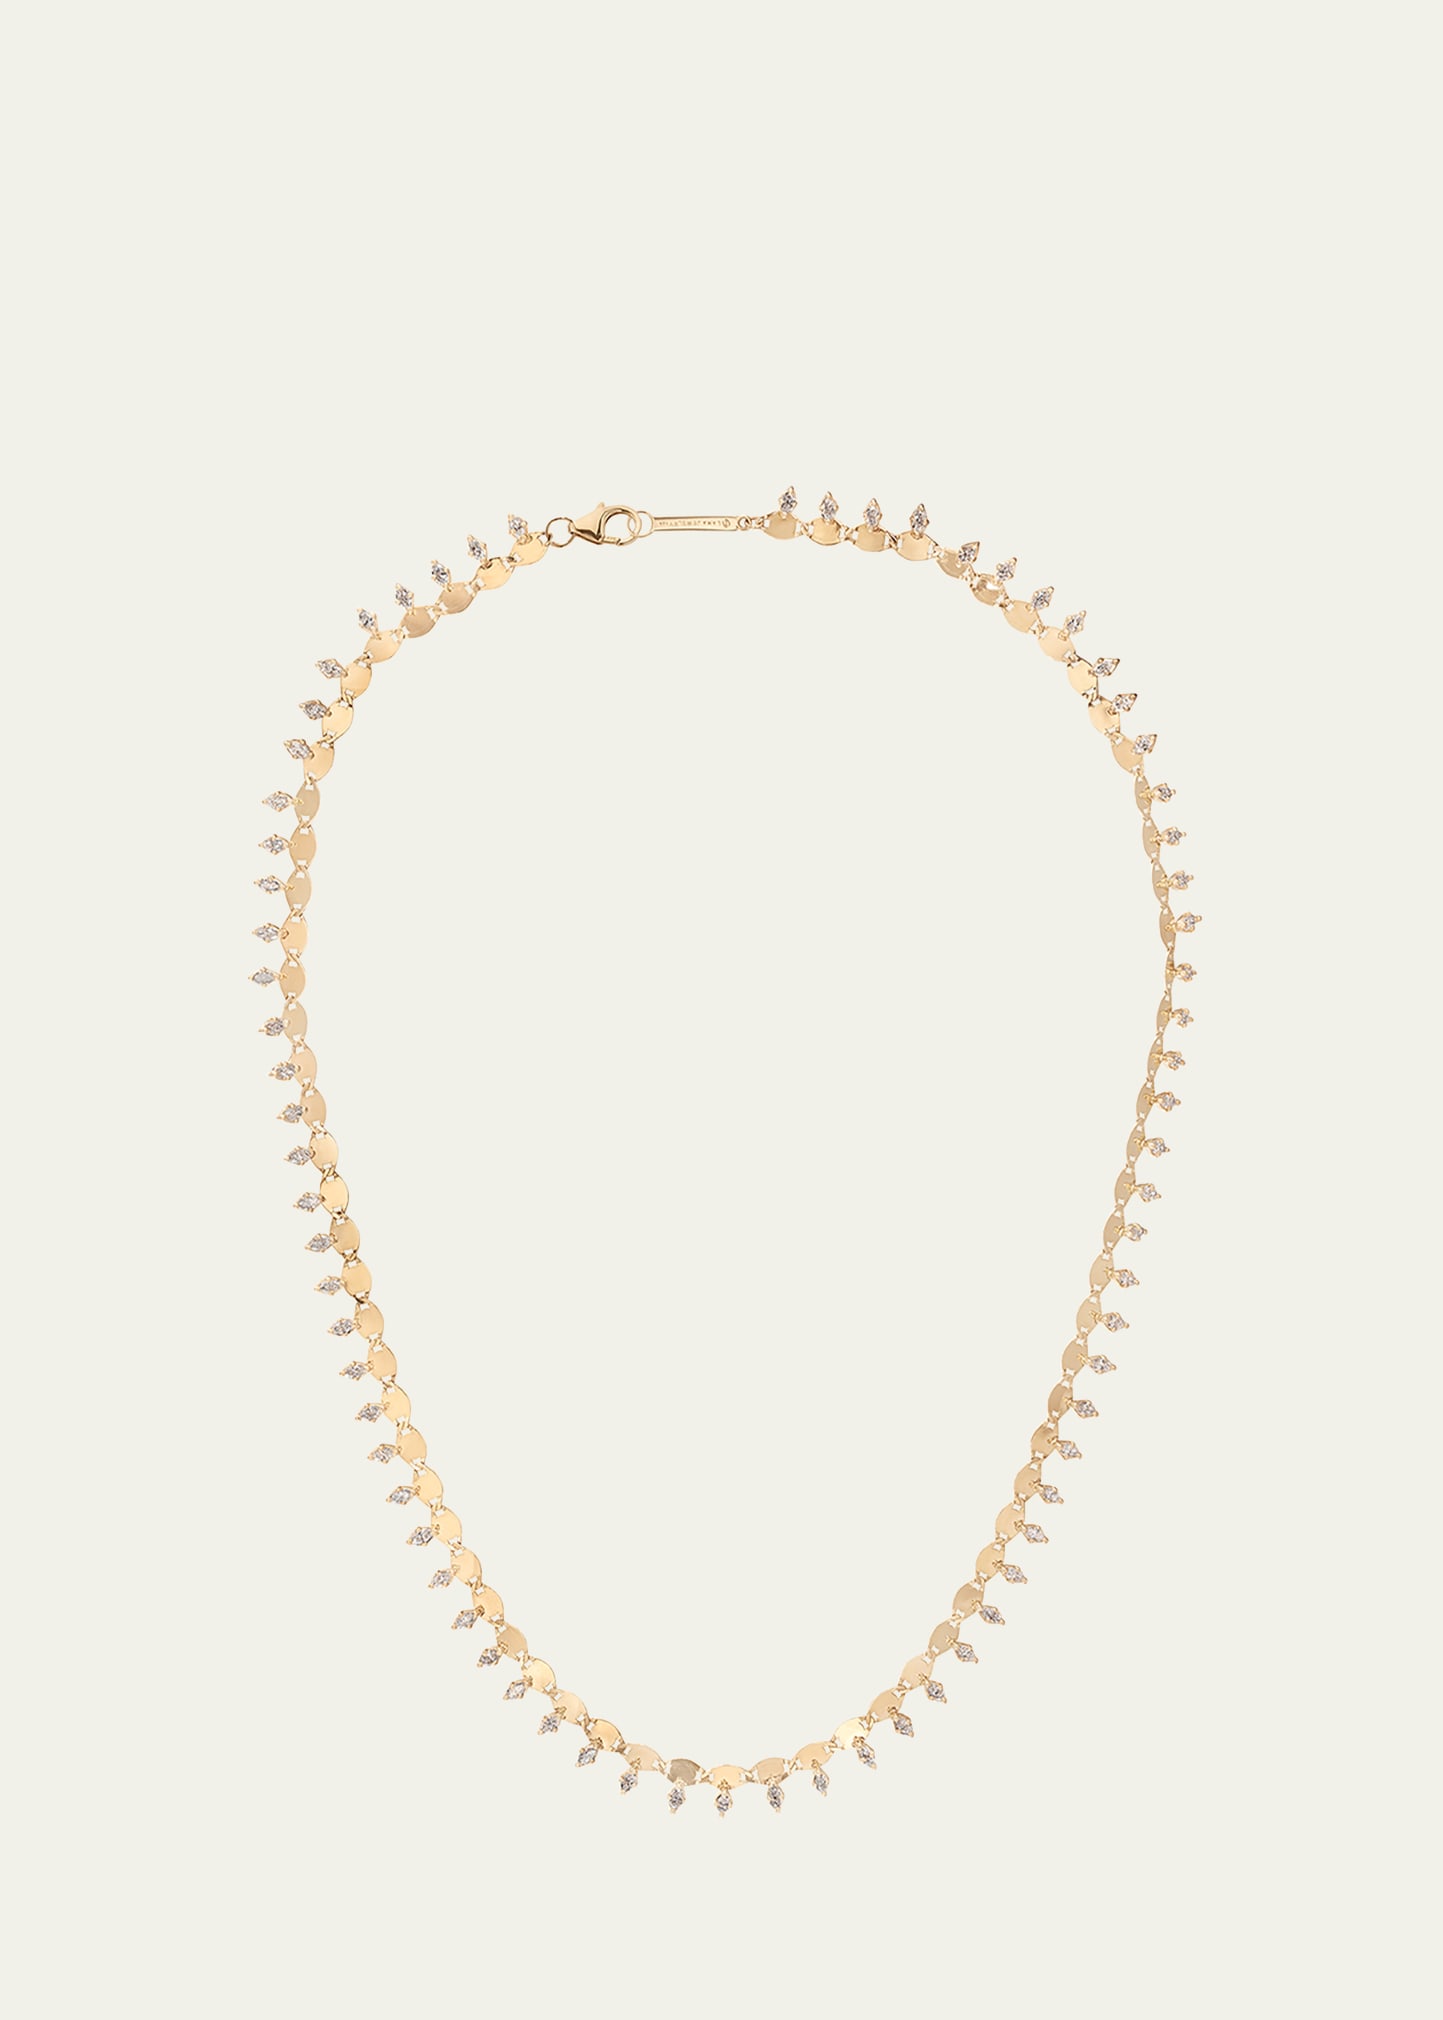 LANA NUDE SOLO 14K YELLOW GOLD NECKLACE WITH MARQUISE DIAMONDS